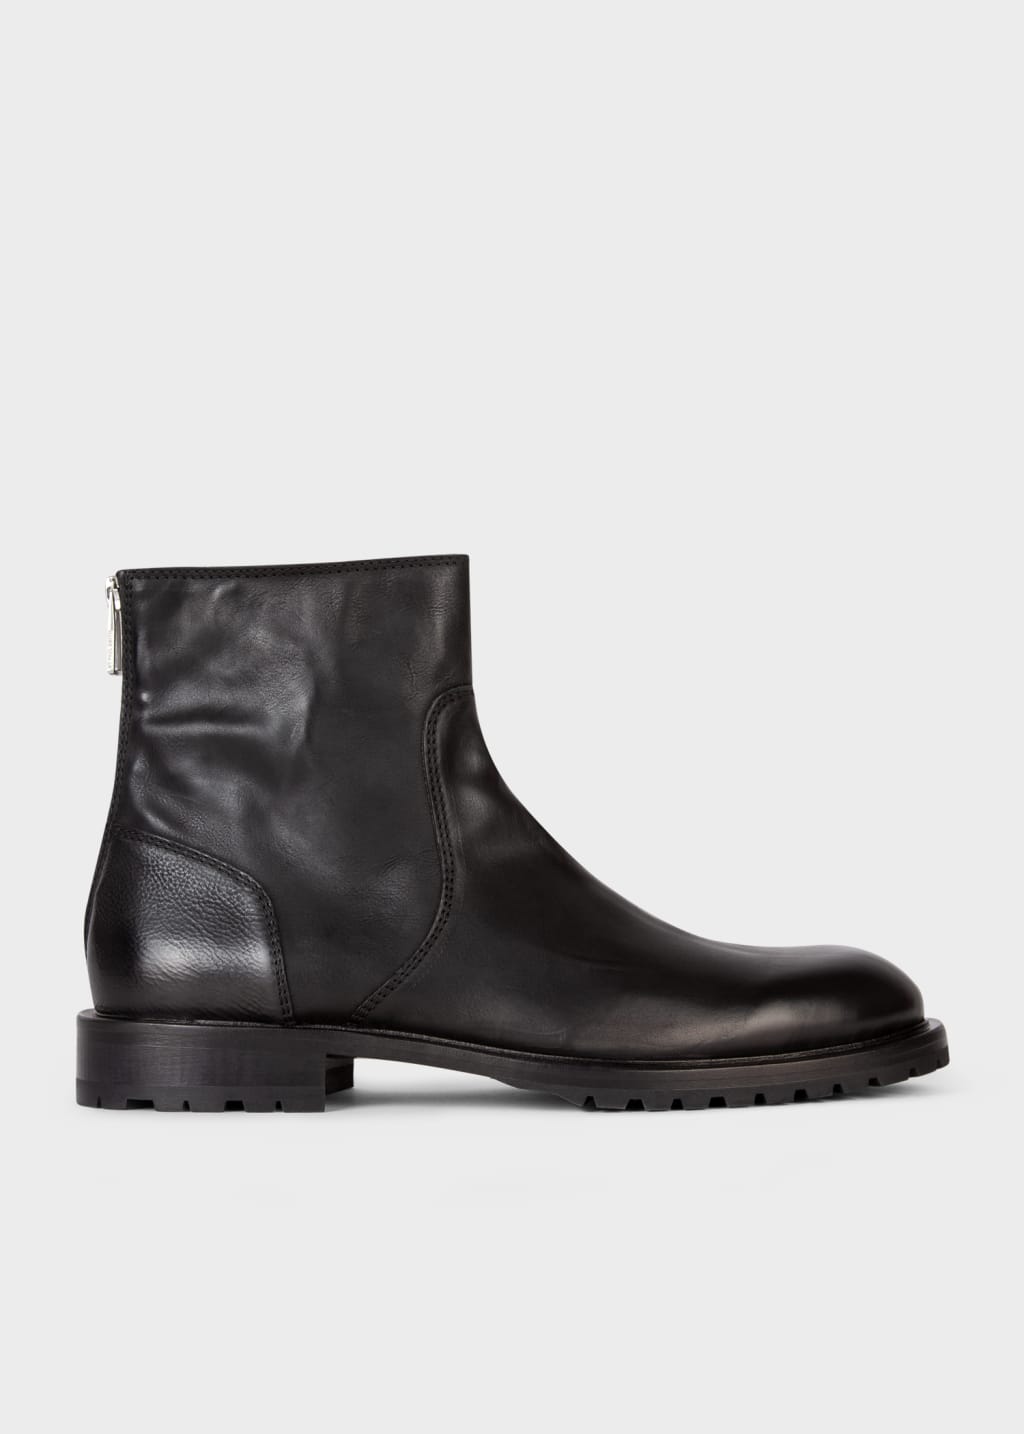 Product View - Black Leather 'Falk' Boots by Paul Smith